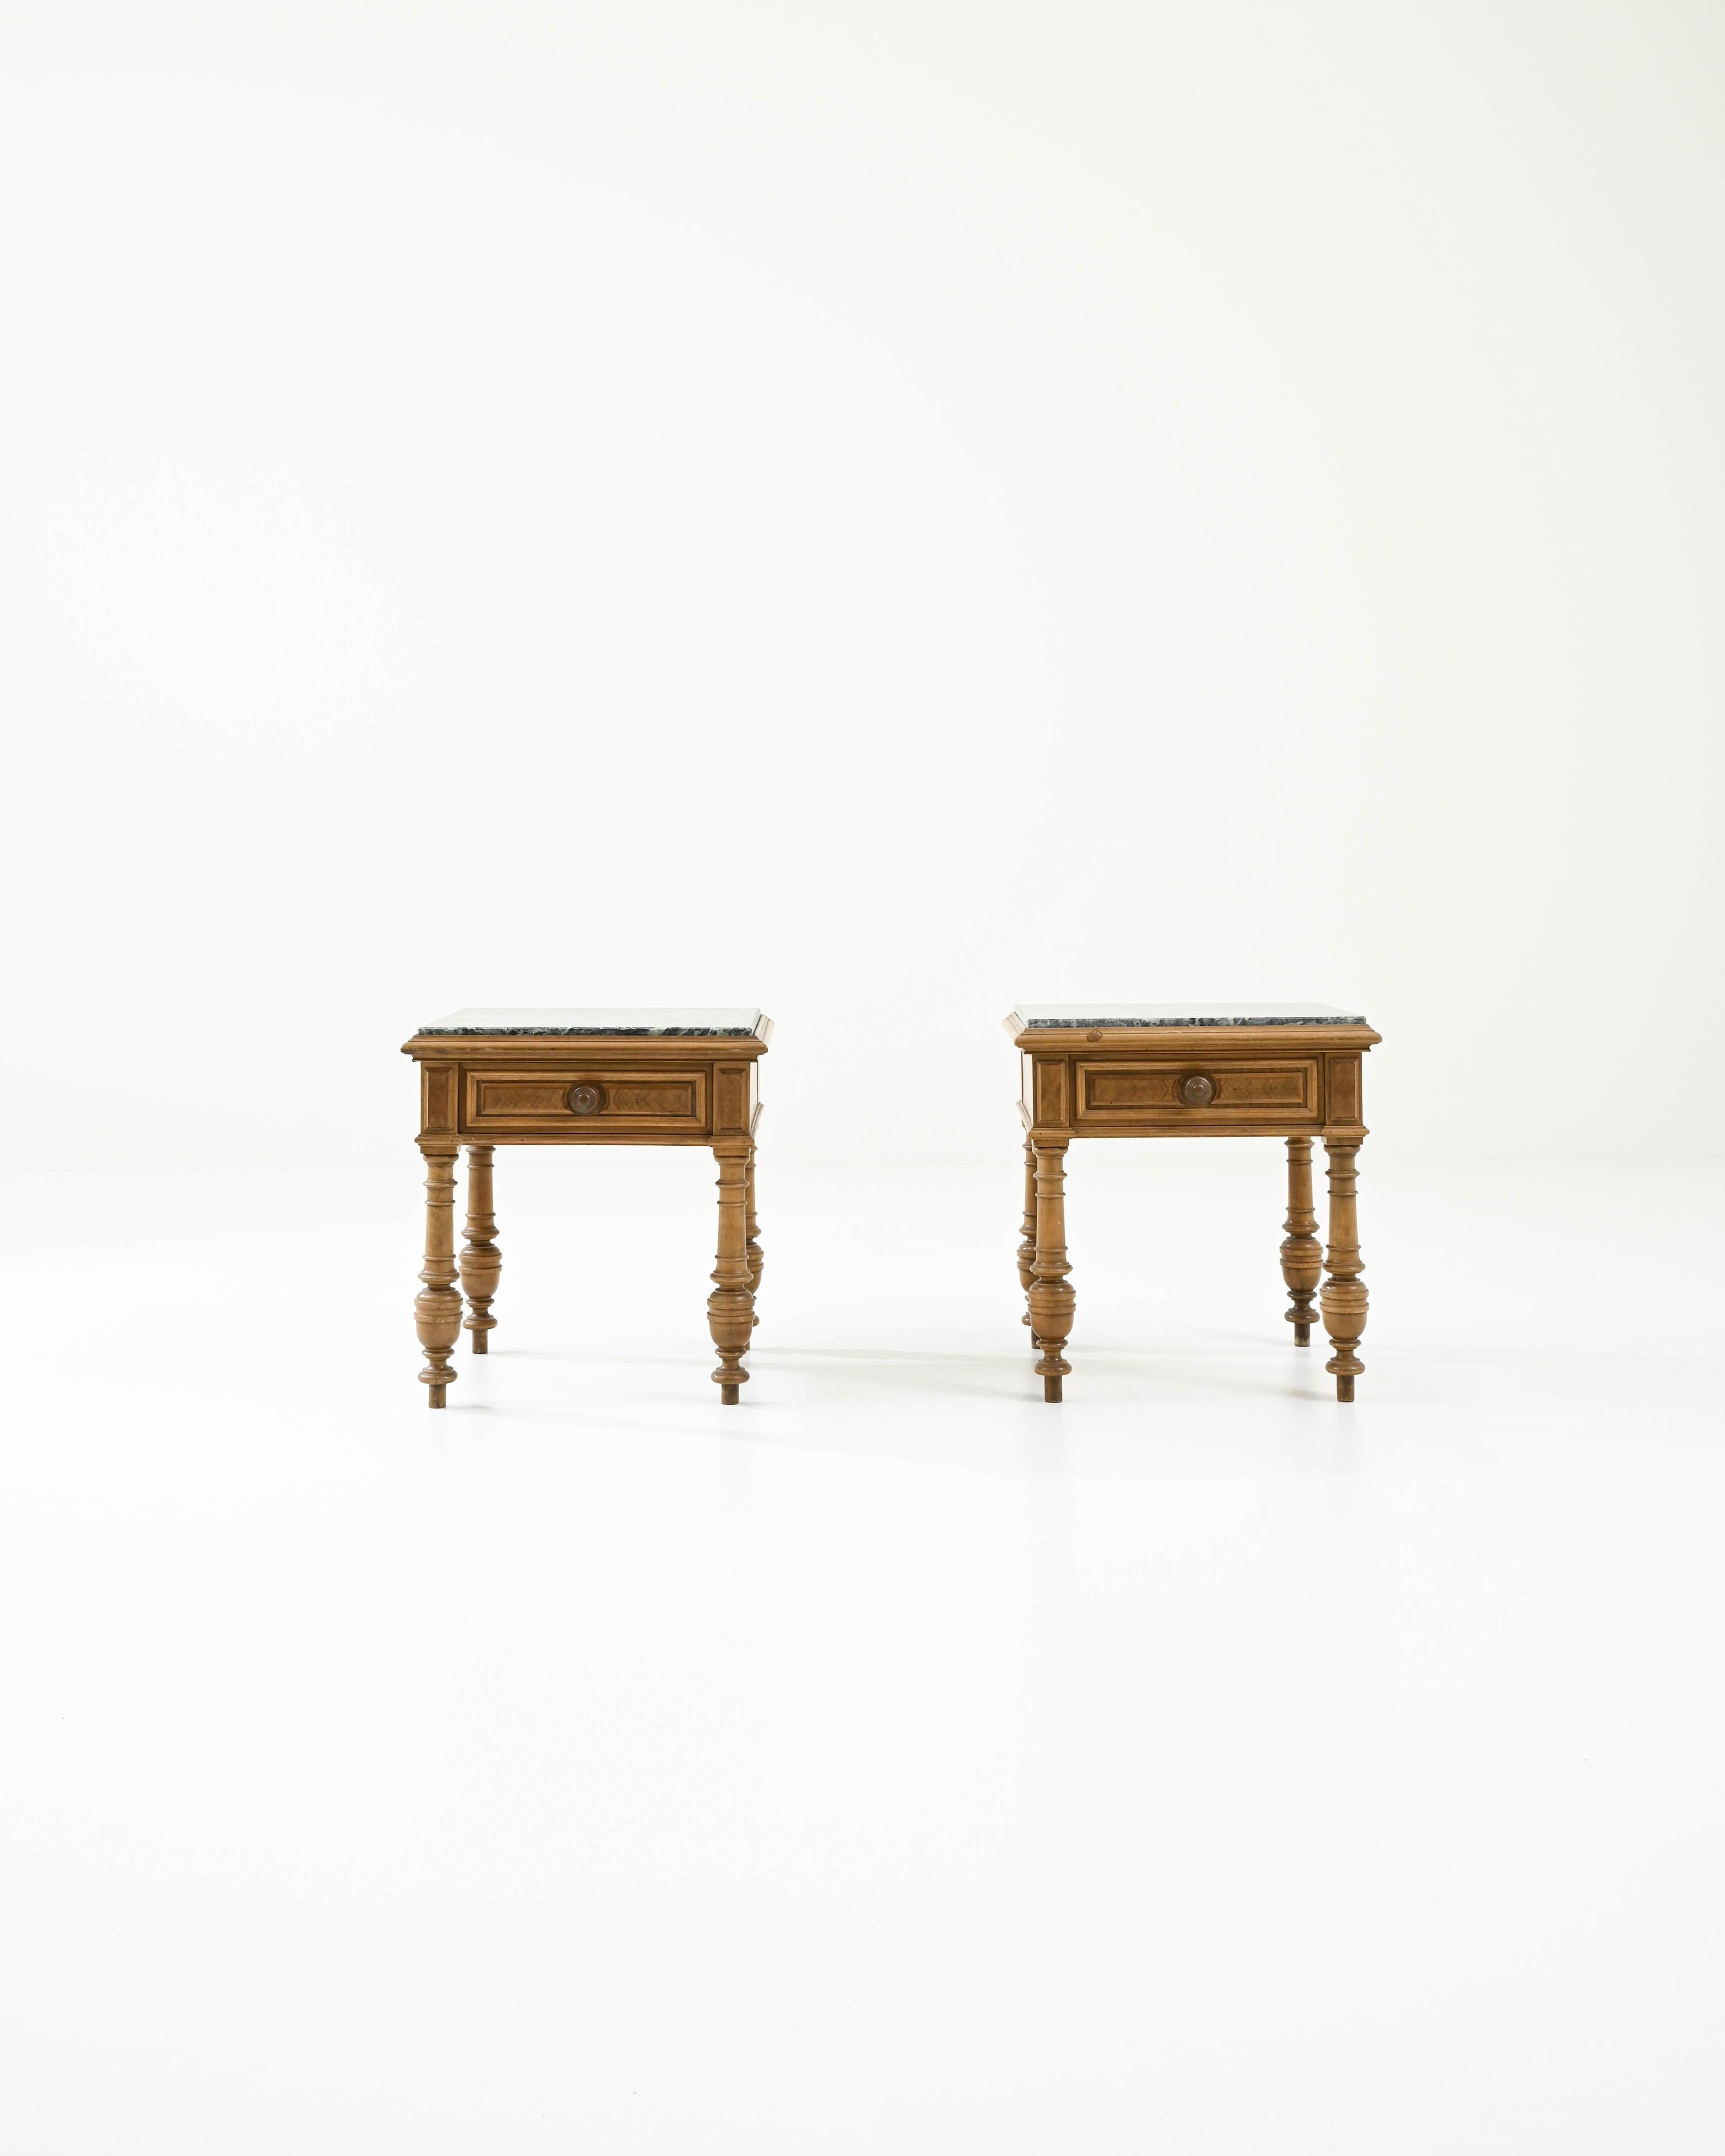 A pair of wooden side tables with marble tops created in 20th century Belgium. Ornate and expertly crafted, this smart pair of tables brings a dignity and calm to the space. The combination of masterfully lathed legs and dazzling green marble top